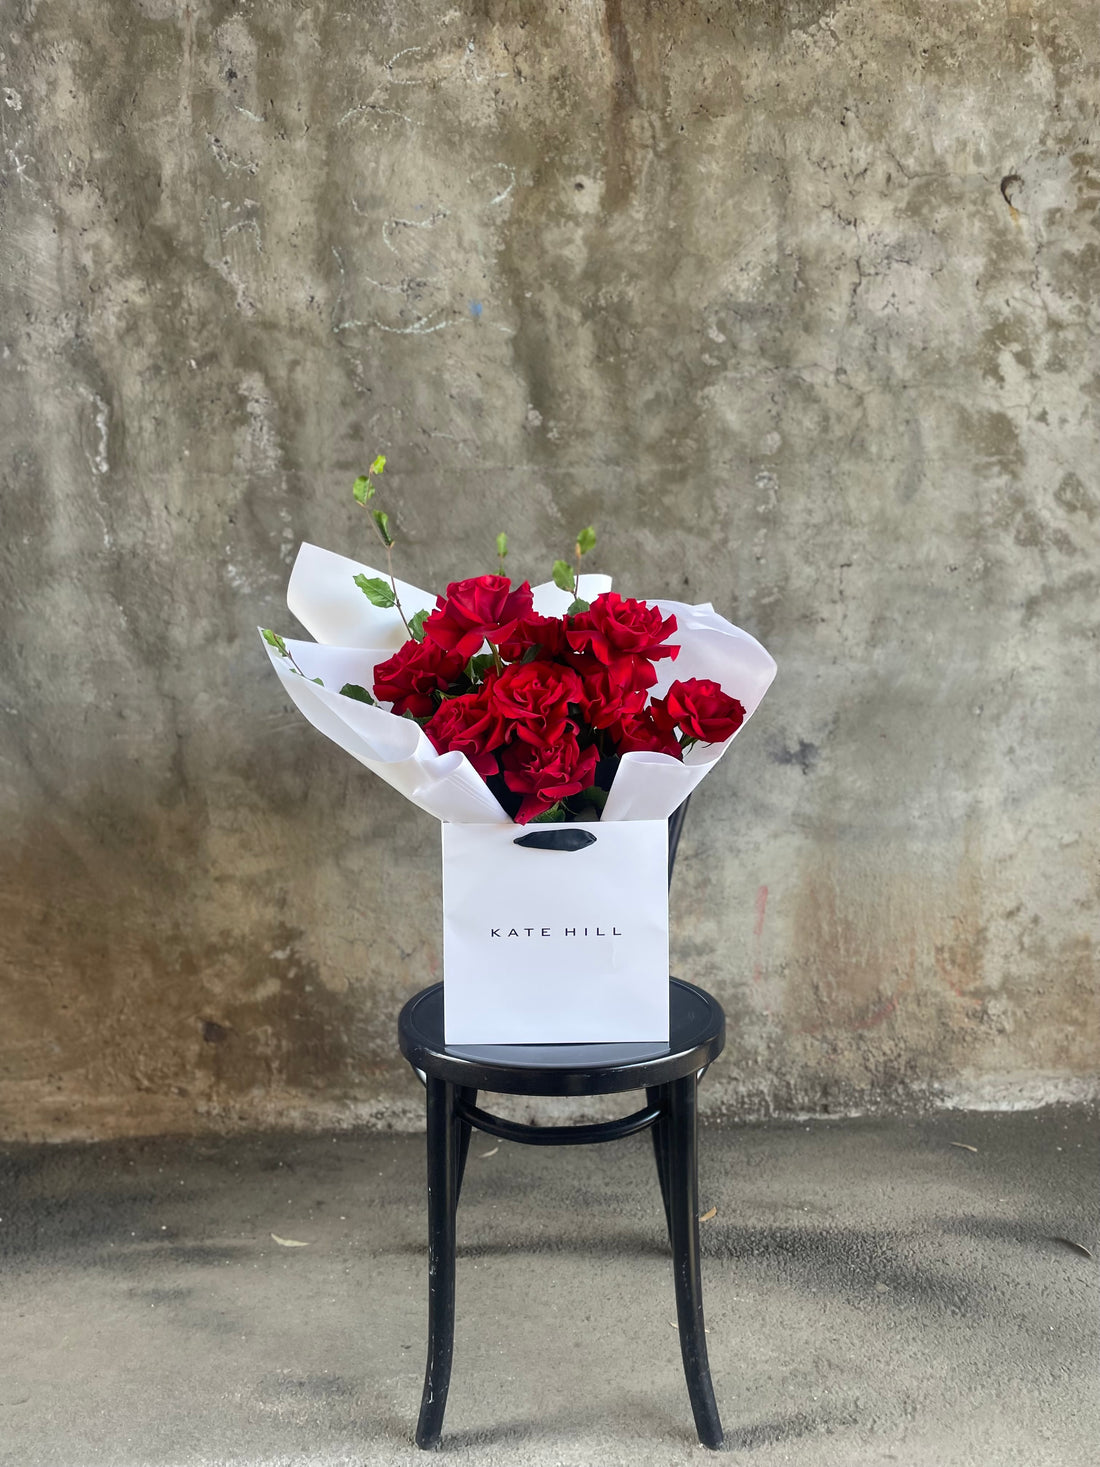 A luxe red rose bouquet designed with 12 premium red roses and foliages, beautifully wrapped with signature KHF wrapping. Bouquet displayed in KHF flower bag and sitting on a black bentwood chair with concrete wall in the background.